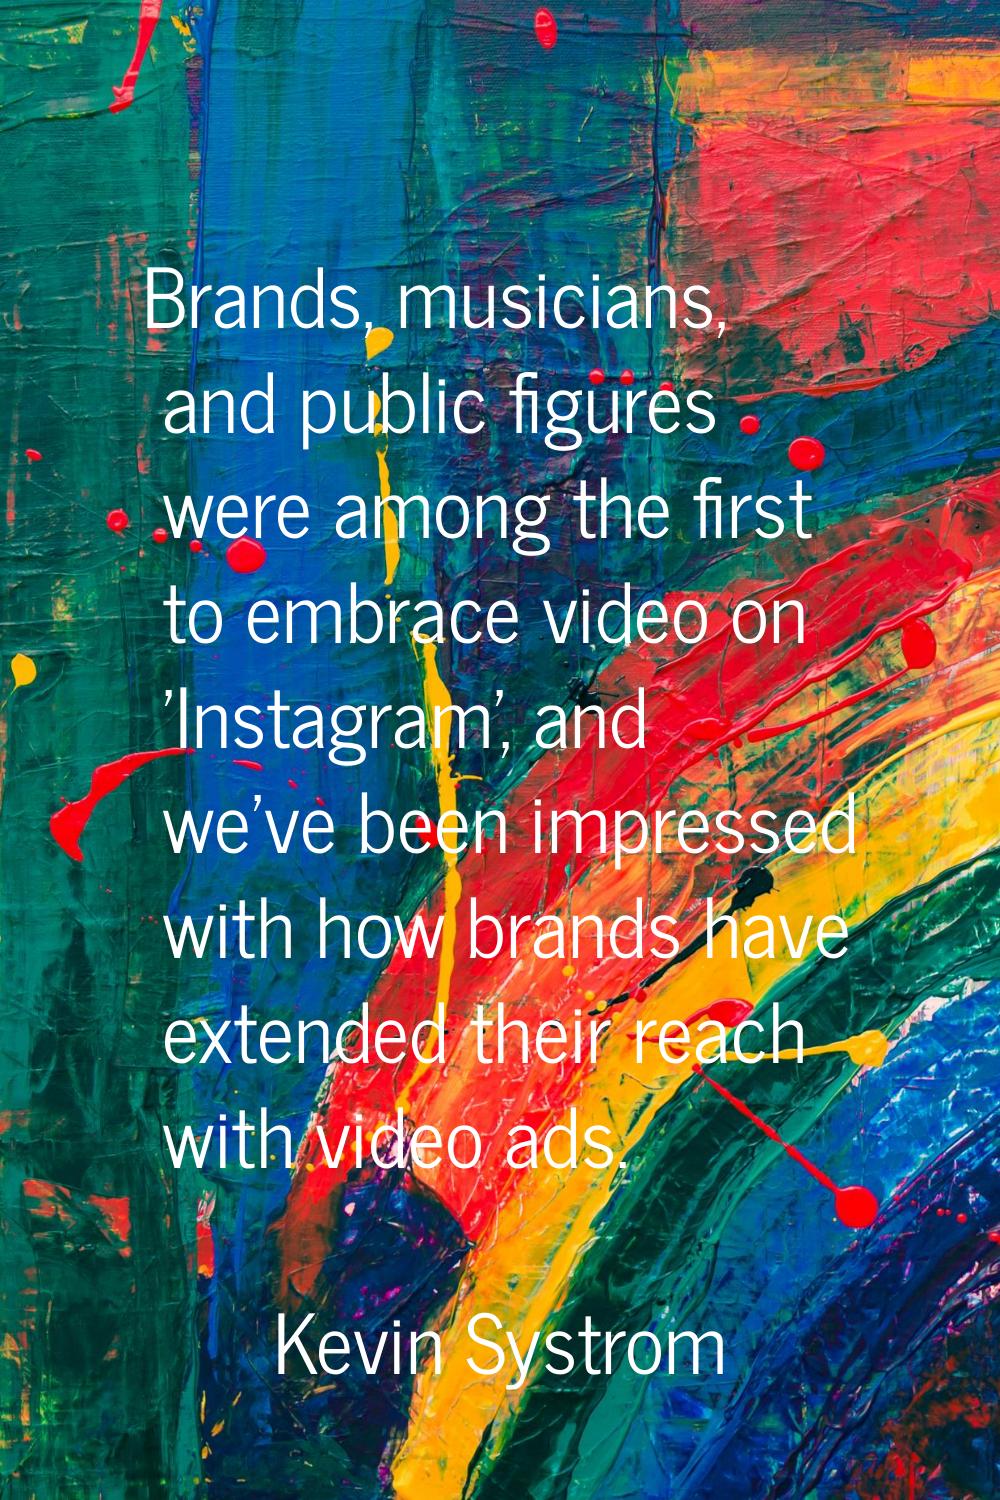 Brands, musicians, and public figures were among the first to embrace video on 'Instagram', and we'